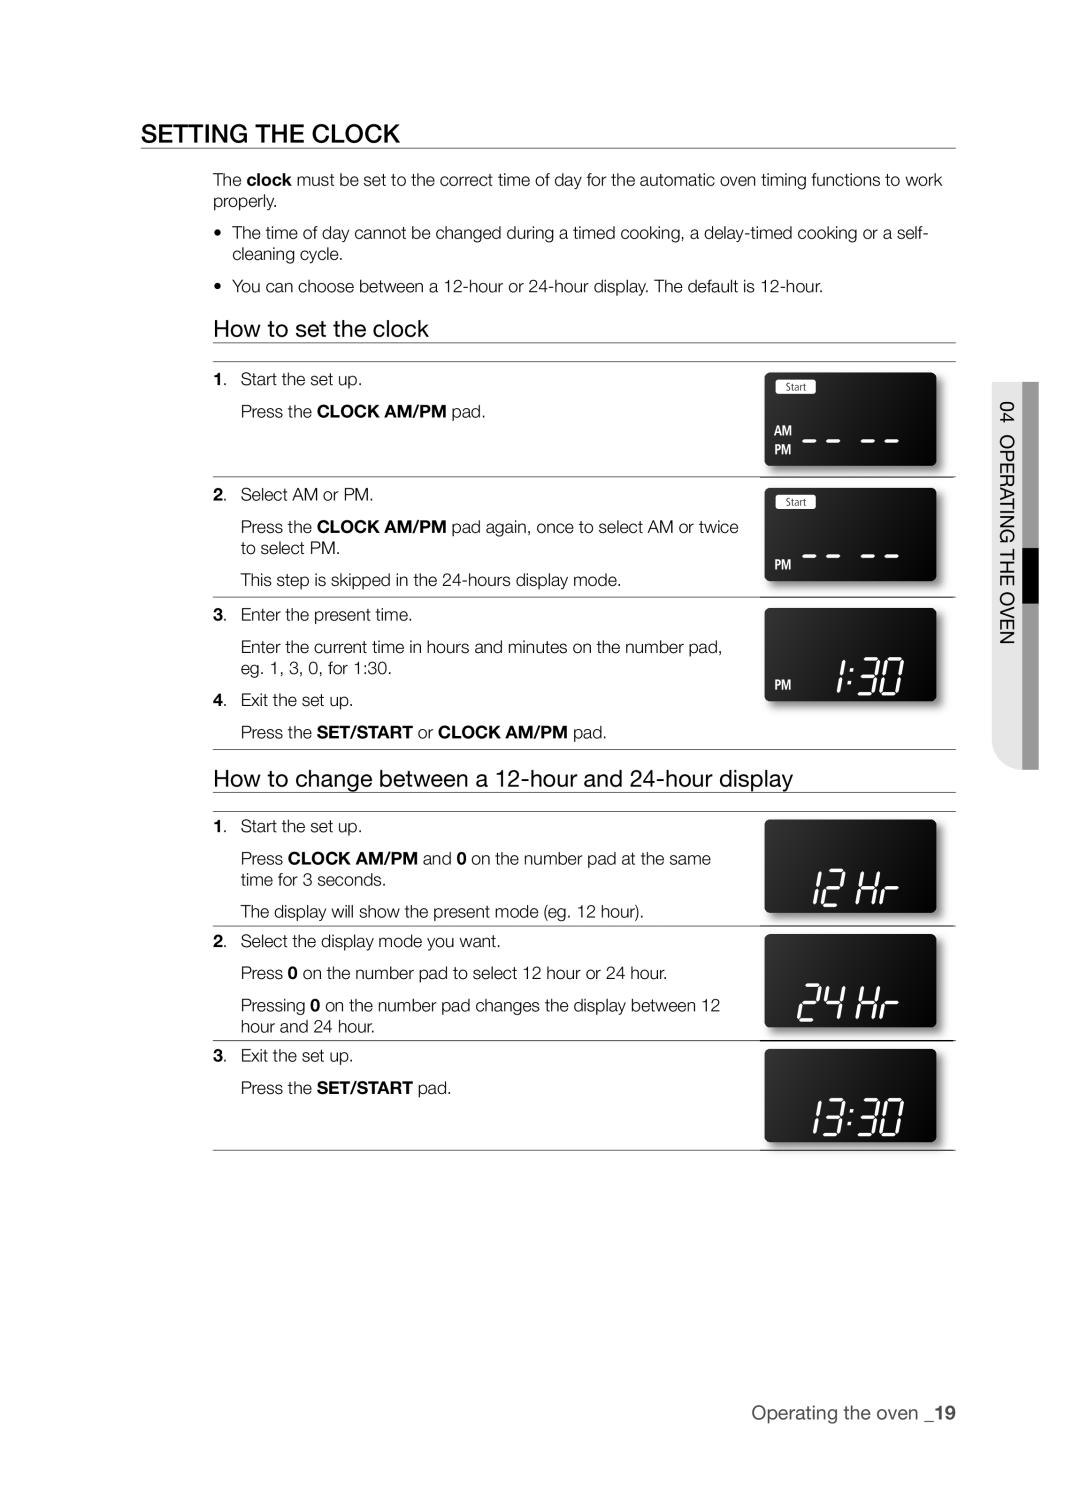 Samsung FTQ352IWX user manual Setting The Clock, How to set the clock, How to change between a 12-hourand 24-hourdisplay 